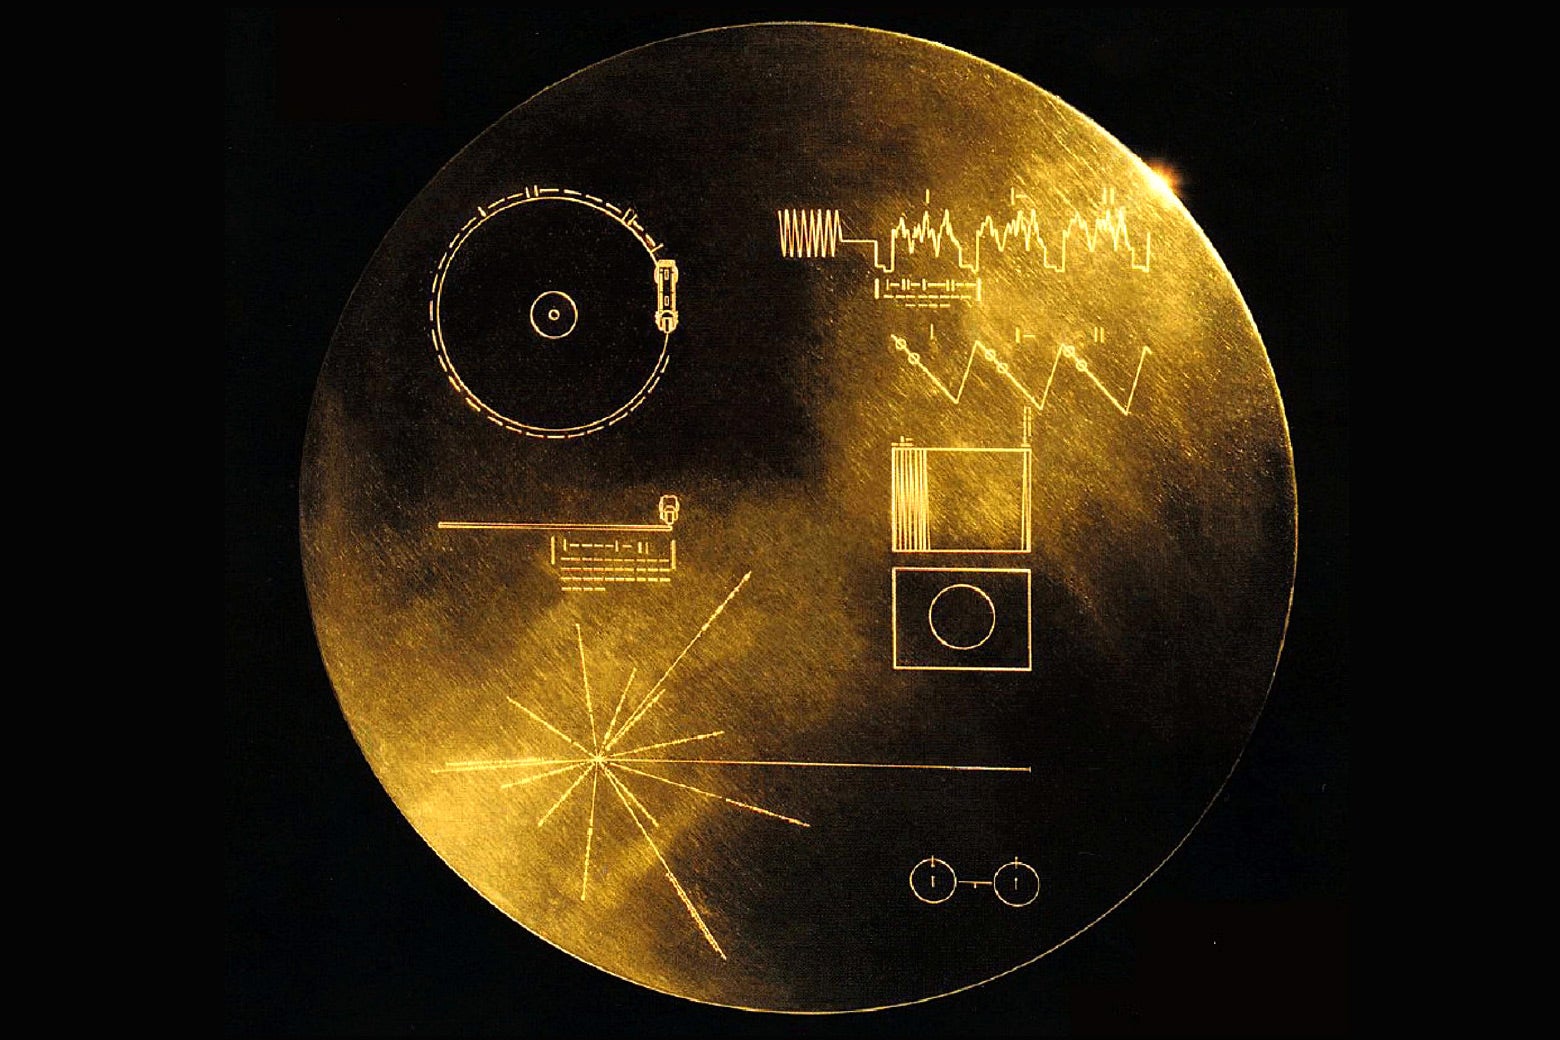 Cover of Voyager Record by Frank Drake and Jon Lomberg.